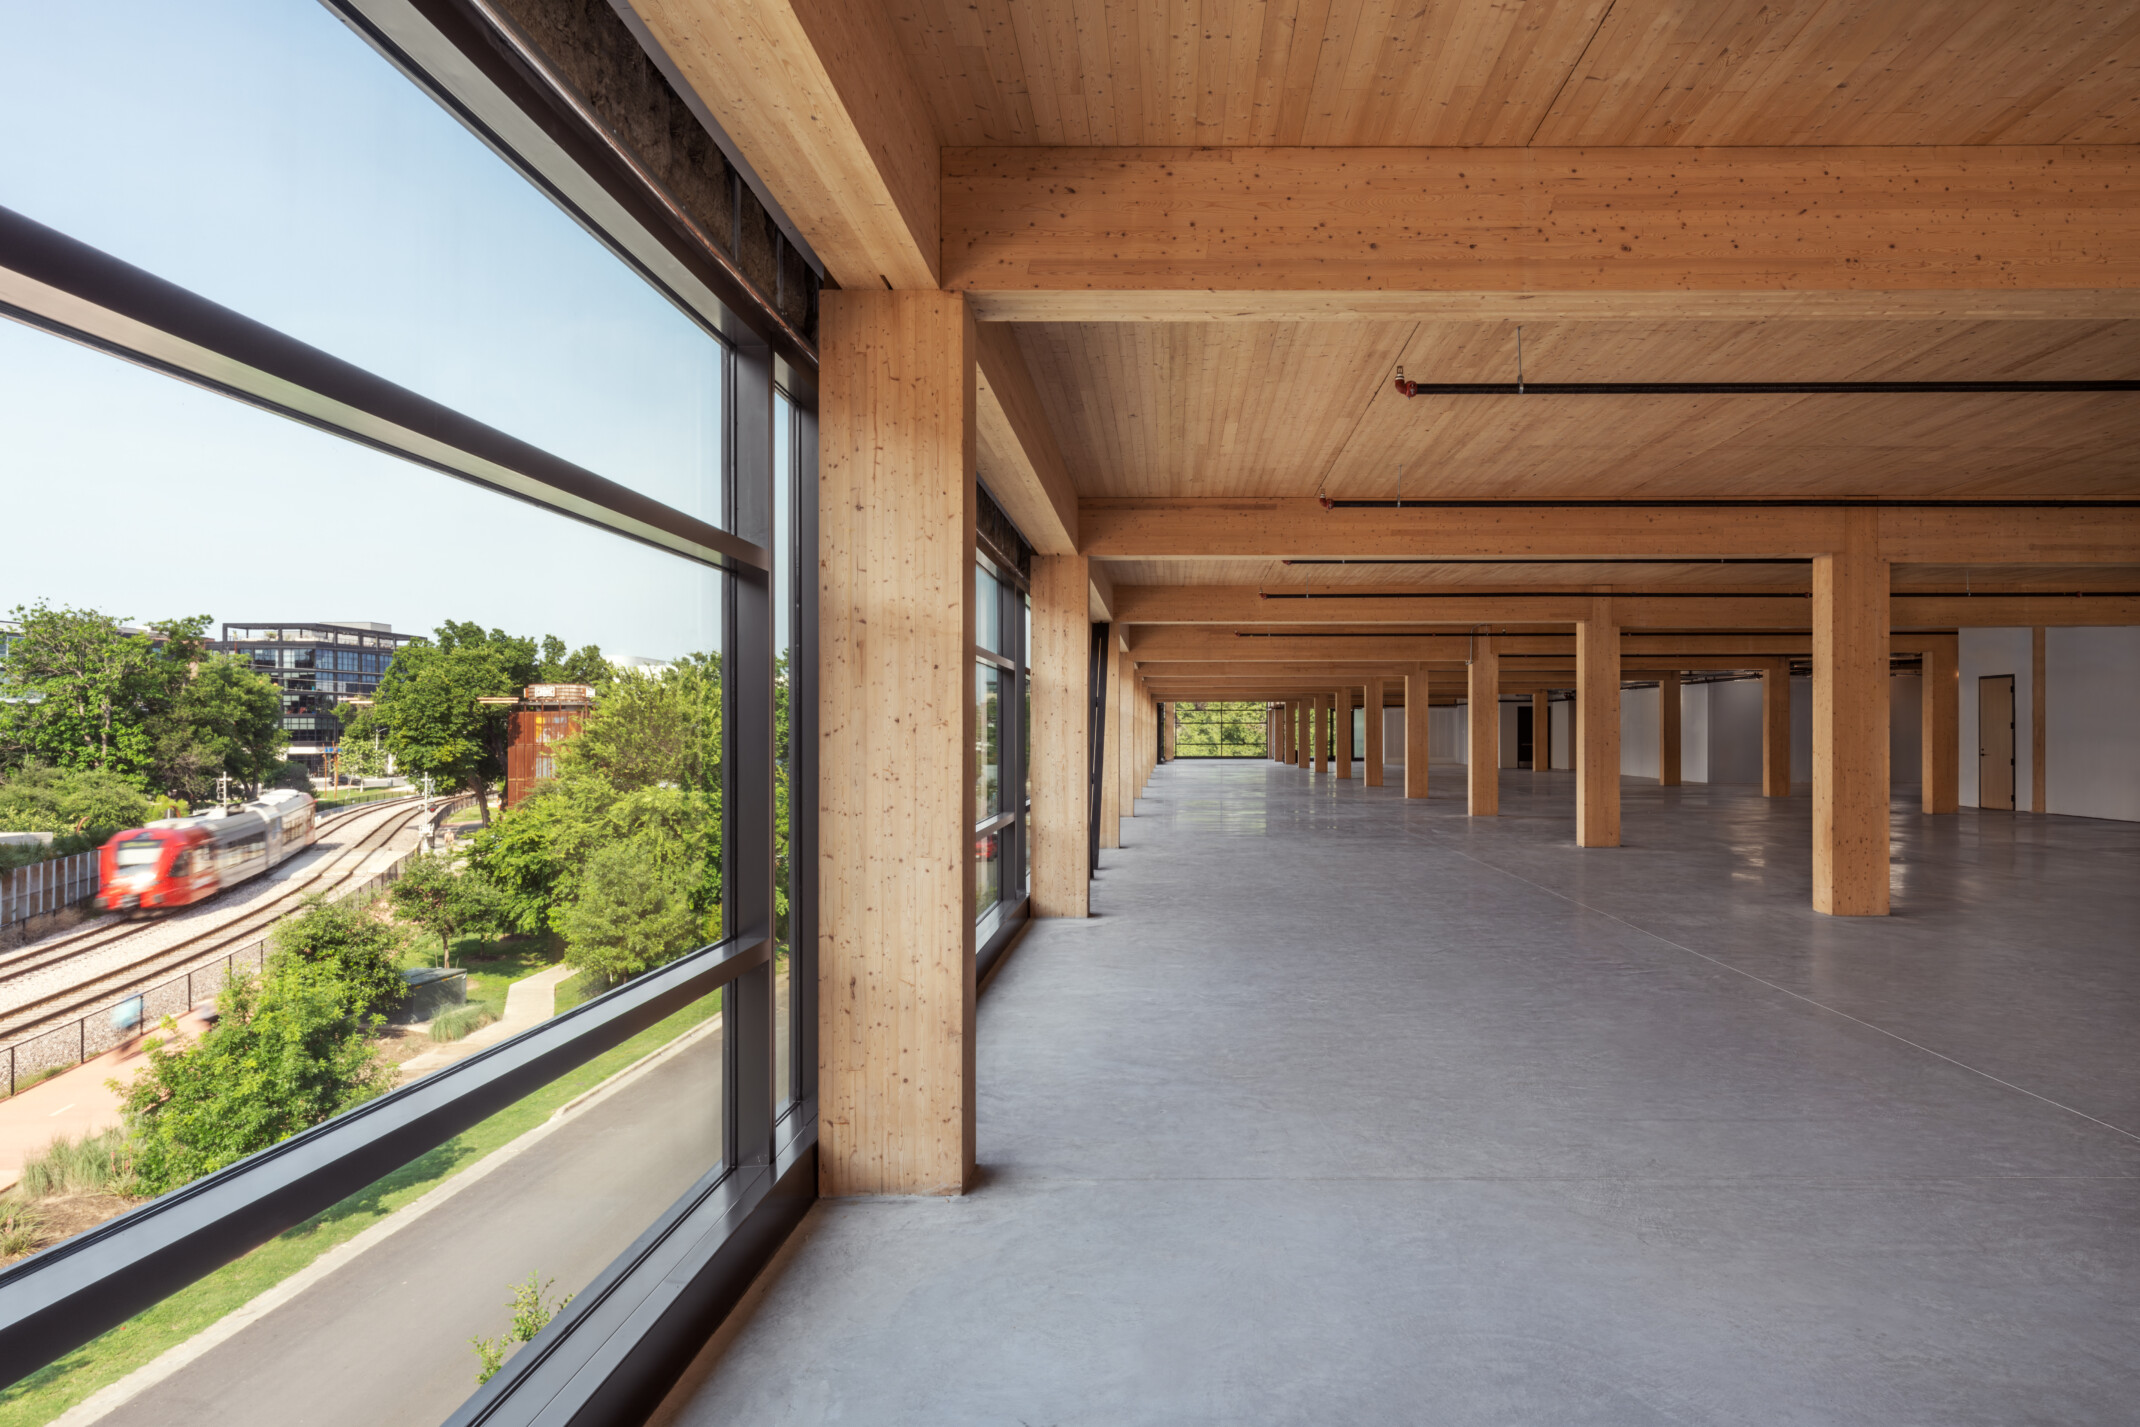 Mass timber open floor plan office space with exposed wood cieling and beams, raw concrete floor, floor to ceiling windows